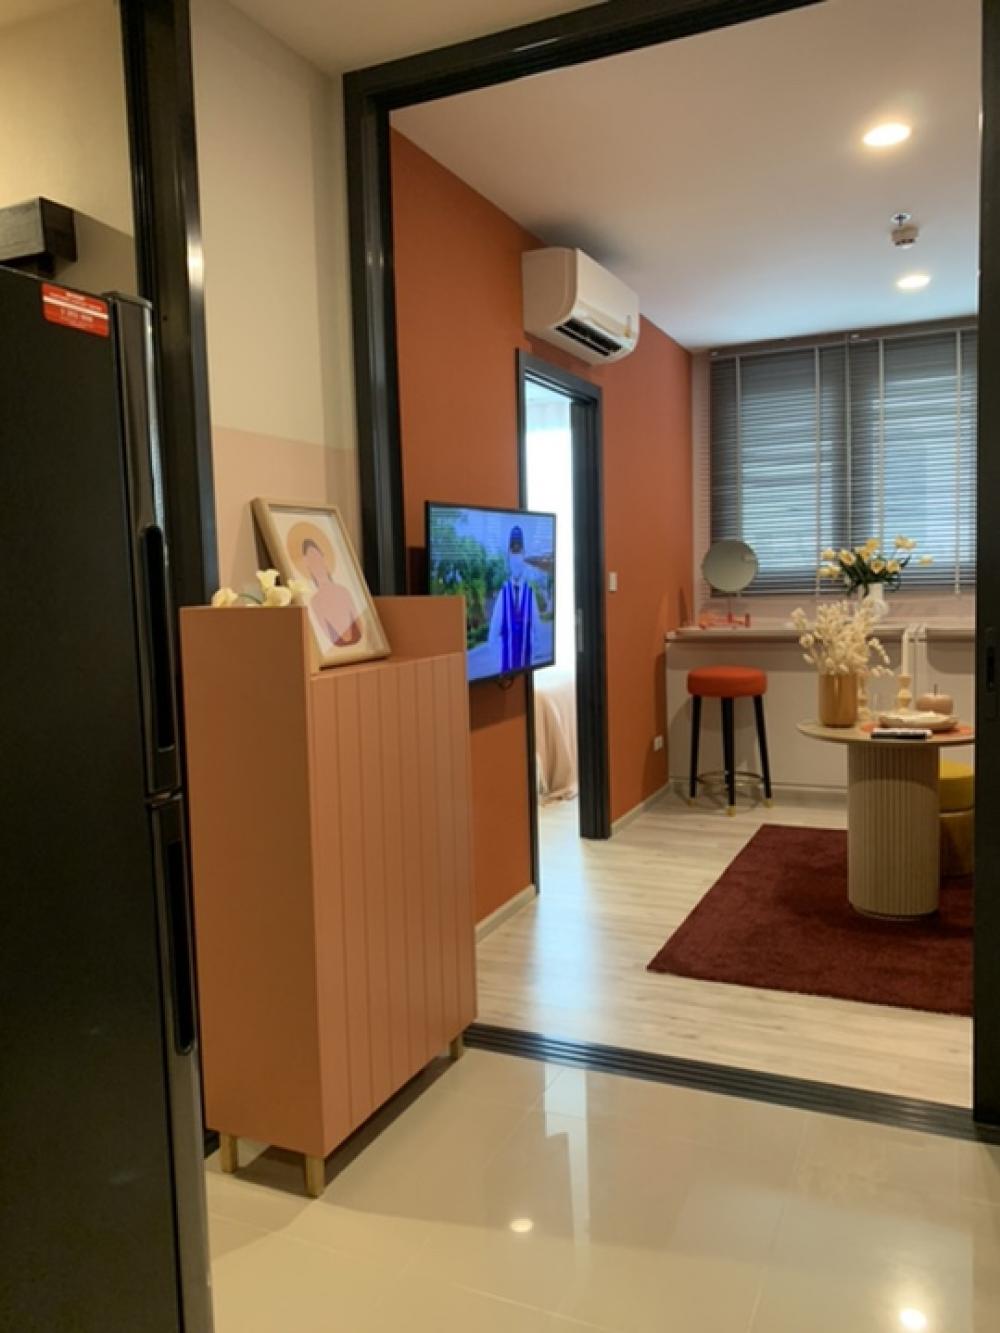 For SaleCondoRatchadapisek, Huaikwang, Suttisan : Luxury condo for sale, next to MRT Huailwang (XT Huai Khwang), next to MRT Huai Khwang, 1 bed 35 sq.m., price 3,900,000 baht, fully furnished, south, get the best wind.